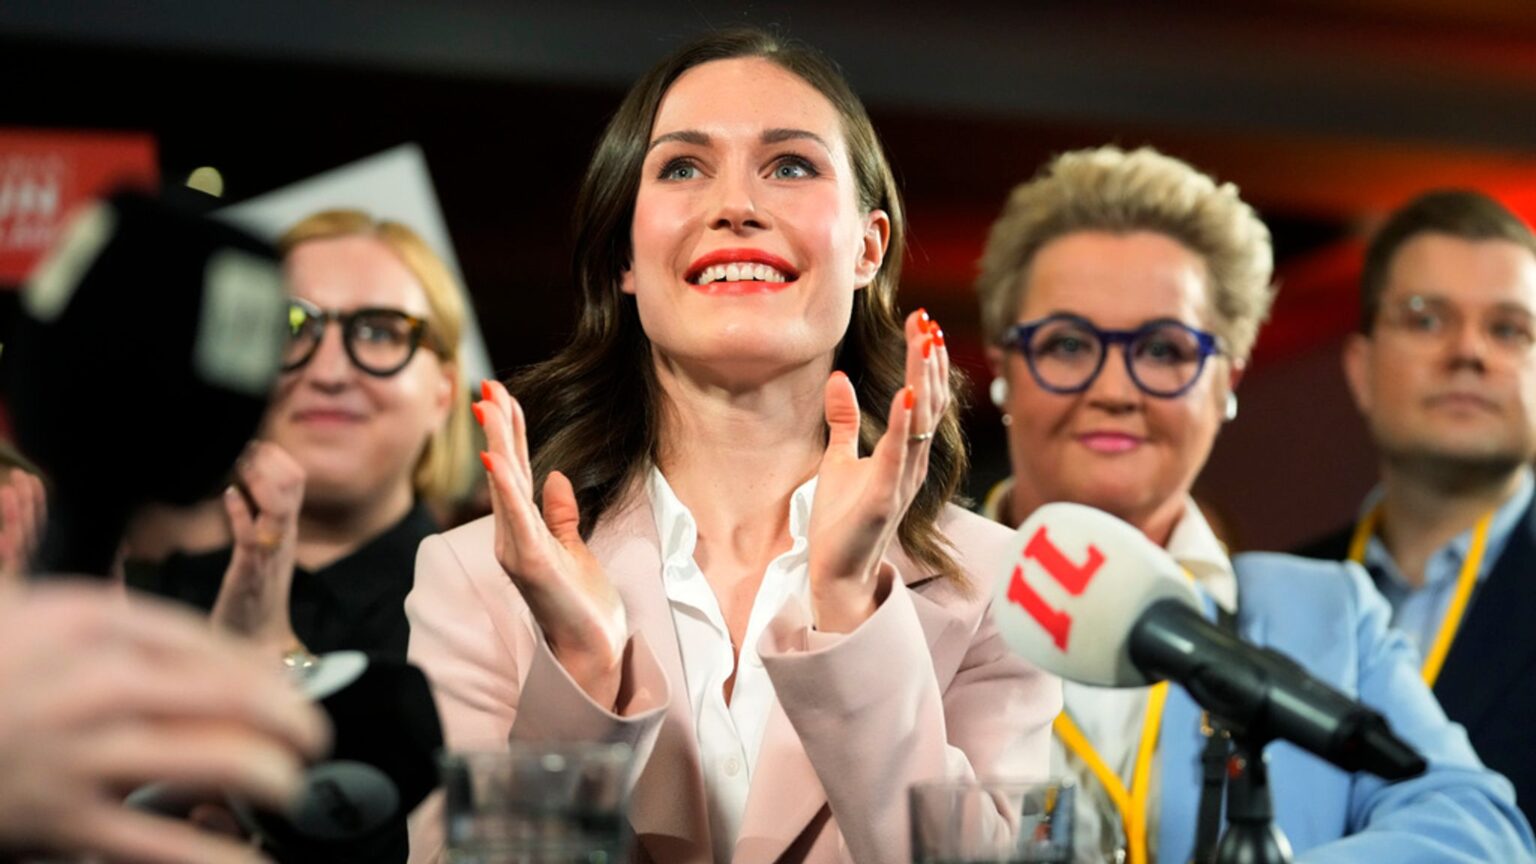 Sanna Marin defeated by Finland’s conservatives in tight race